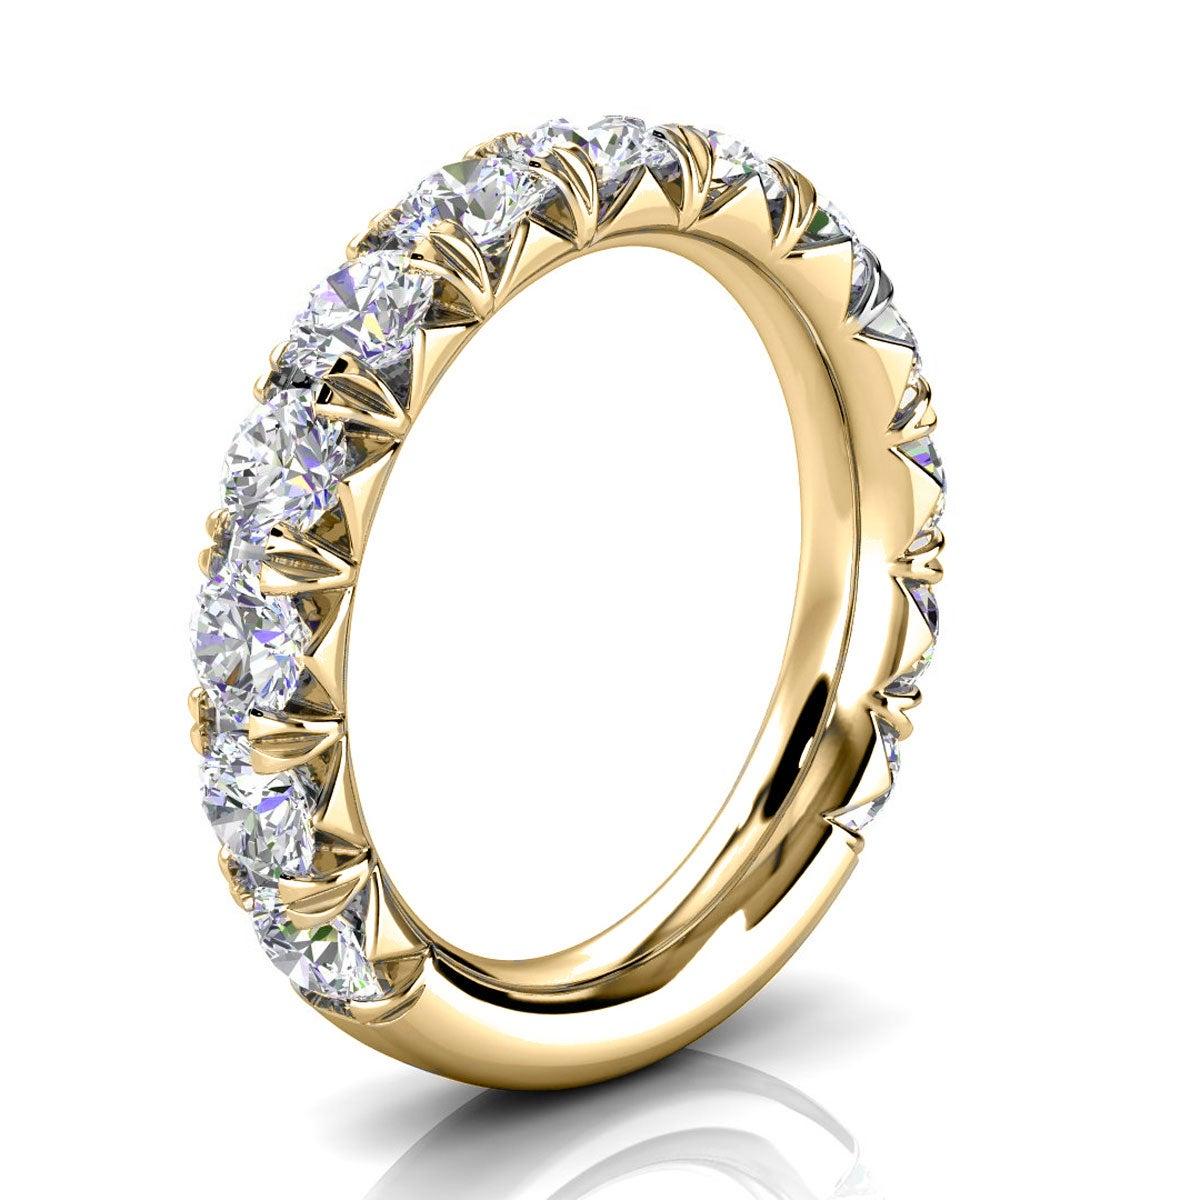 For Sale:  18k Yellow Gold GIA French Pave Diamond Ring '2 Ct. Tw' 2